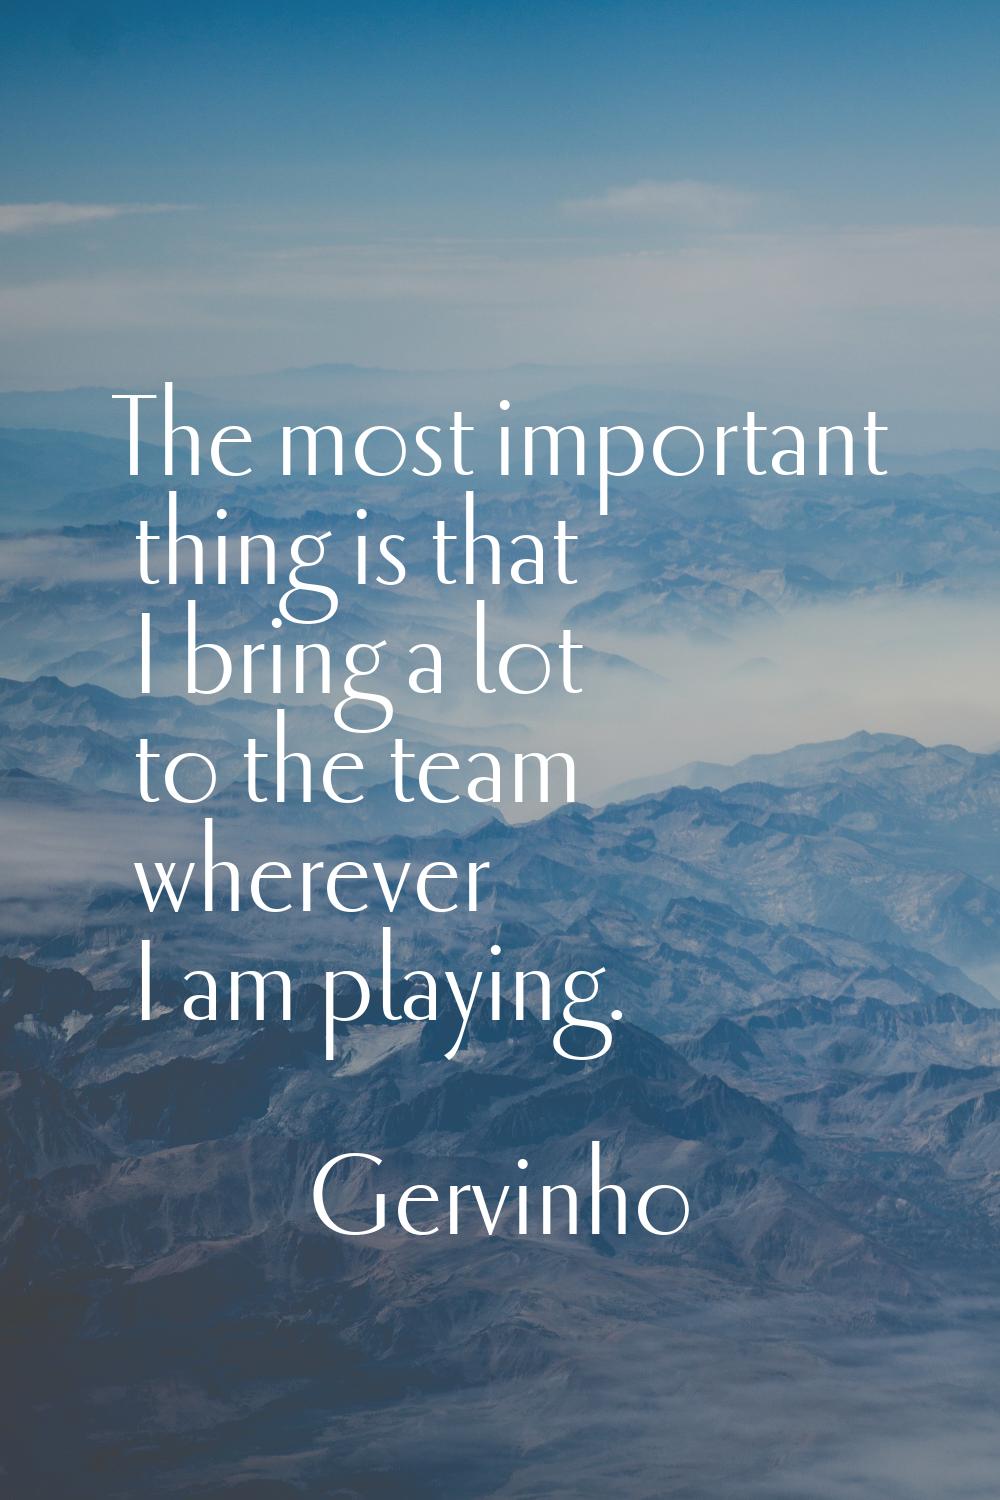 The most important thing is that I bring a lot to the team wherever I am playing.